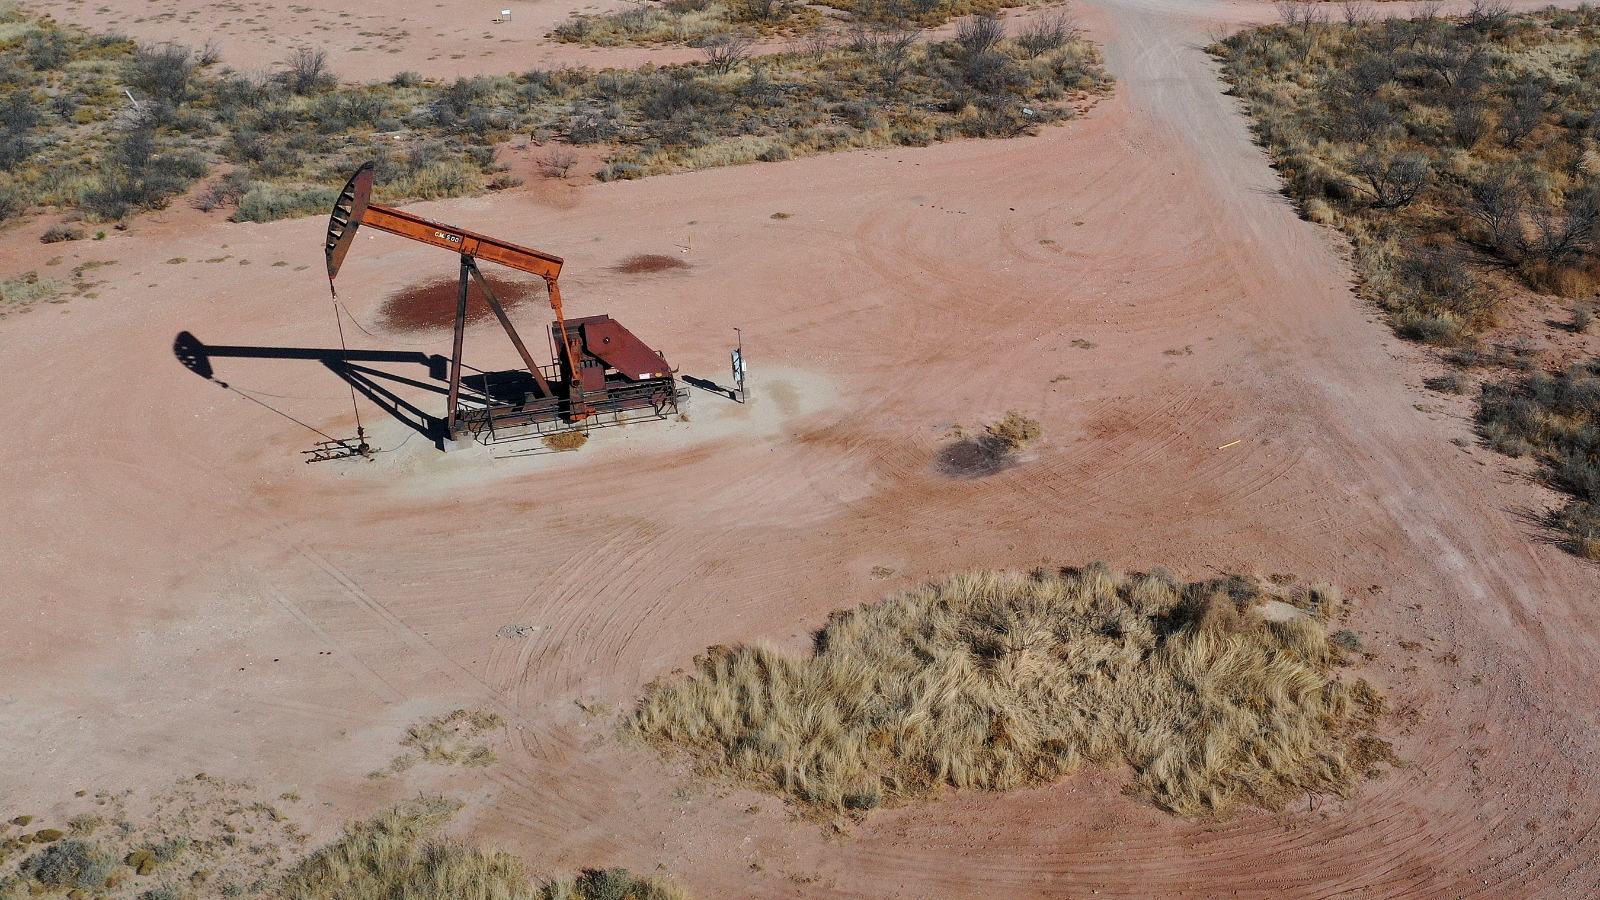 An aerial view of reddish sand and a red oil rig in the middle of two areas of scrub brush.